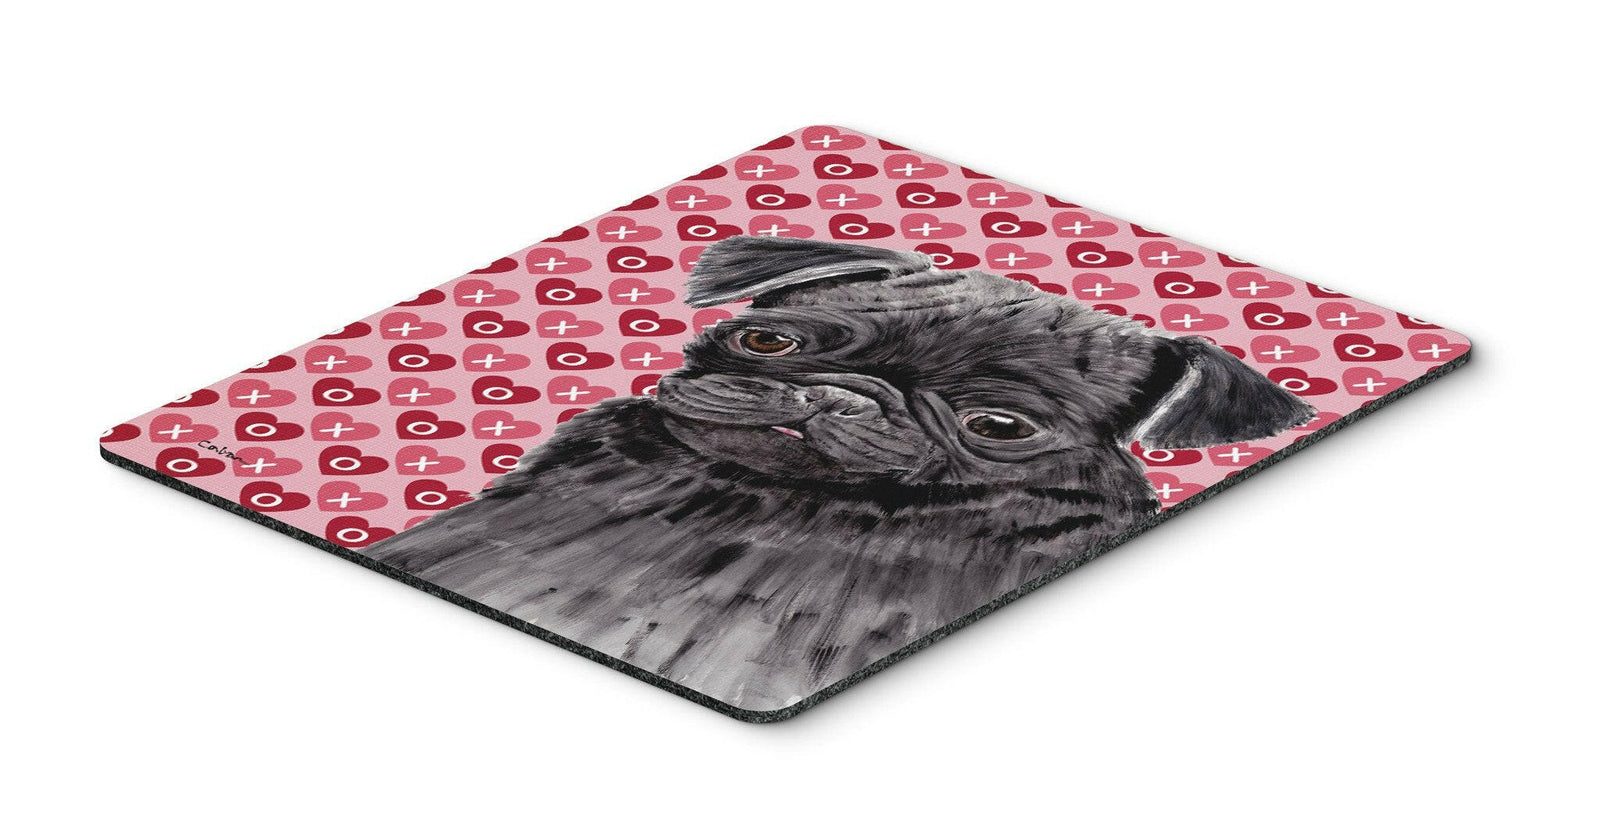 Pug Black Hearts Love and Valentine's Day Portrait Mouse Pad, Hot Pad or Trivet by Caroline's Treasures